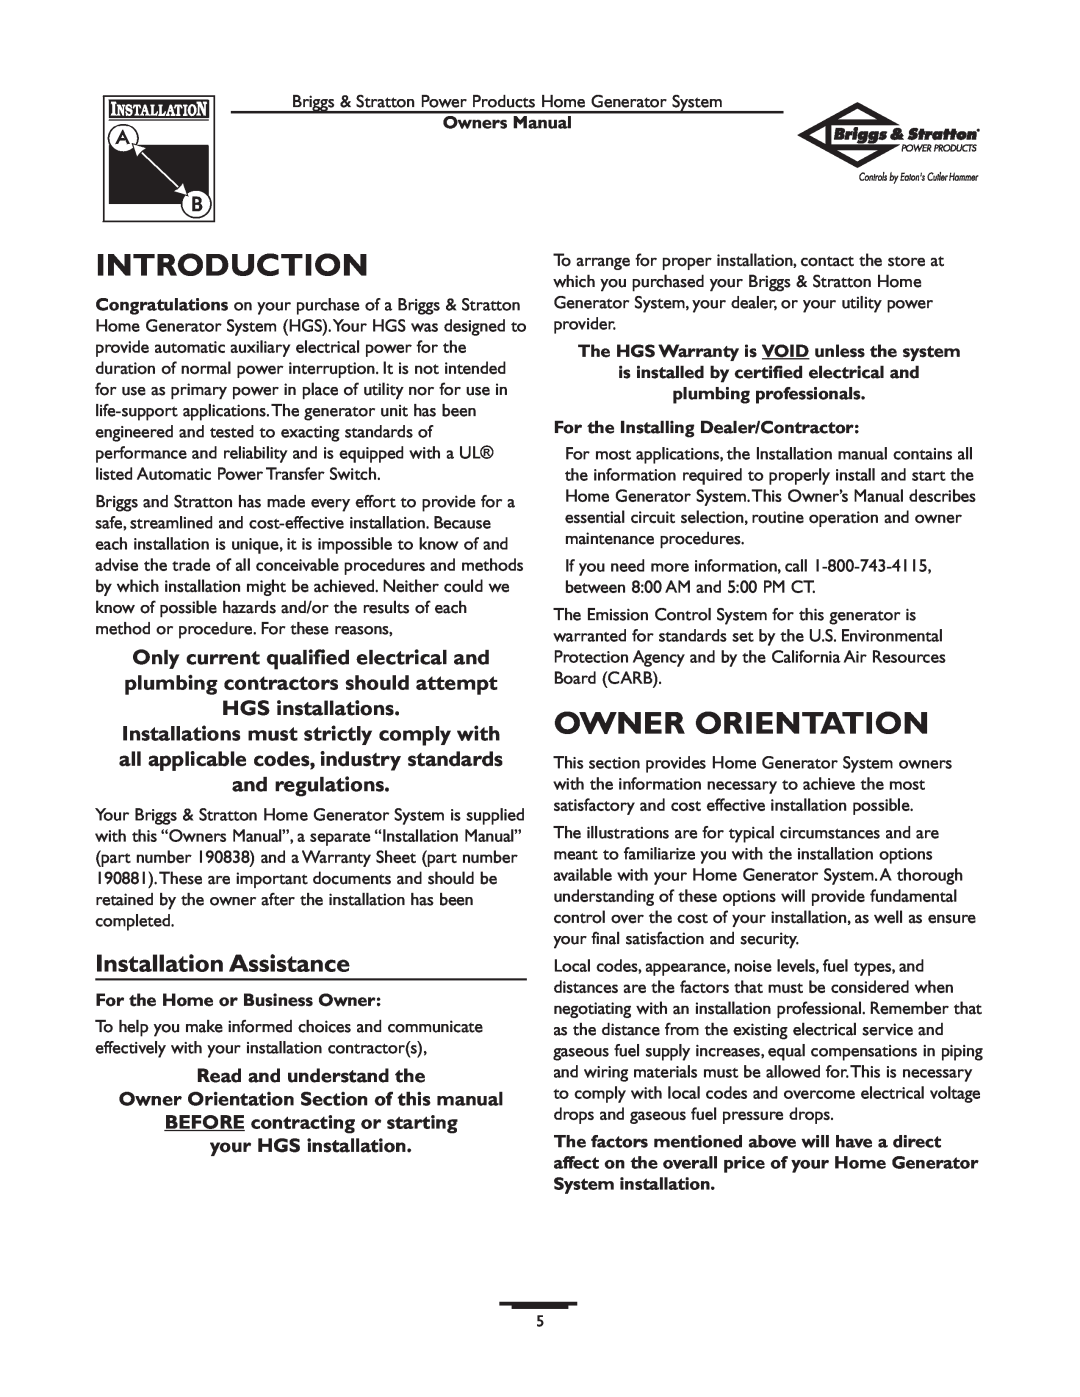 Briggs & Stratton 1679-0 owner manual Introduction, Owner Orientation, Installation Assistance 